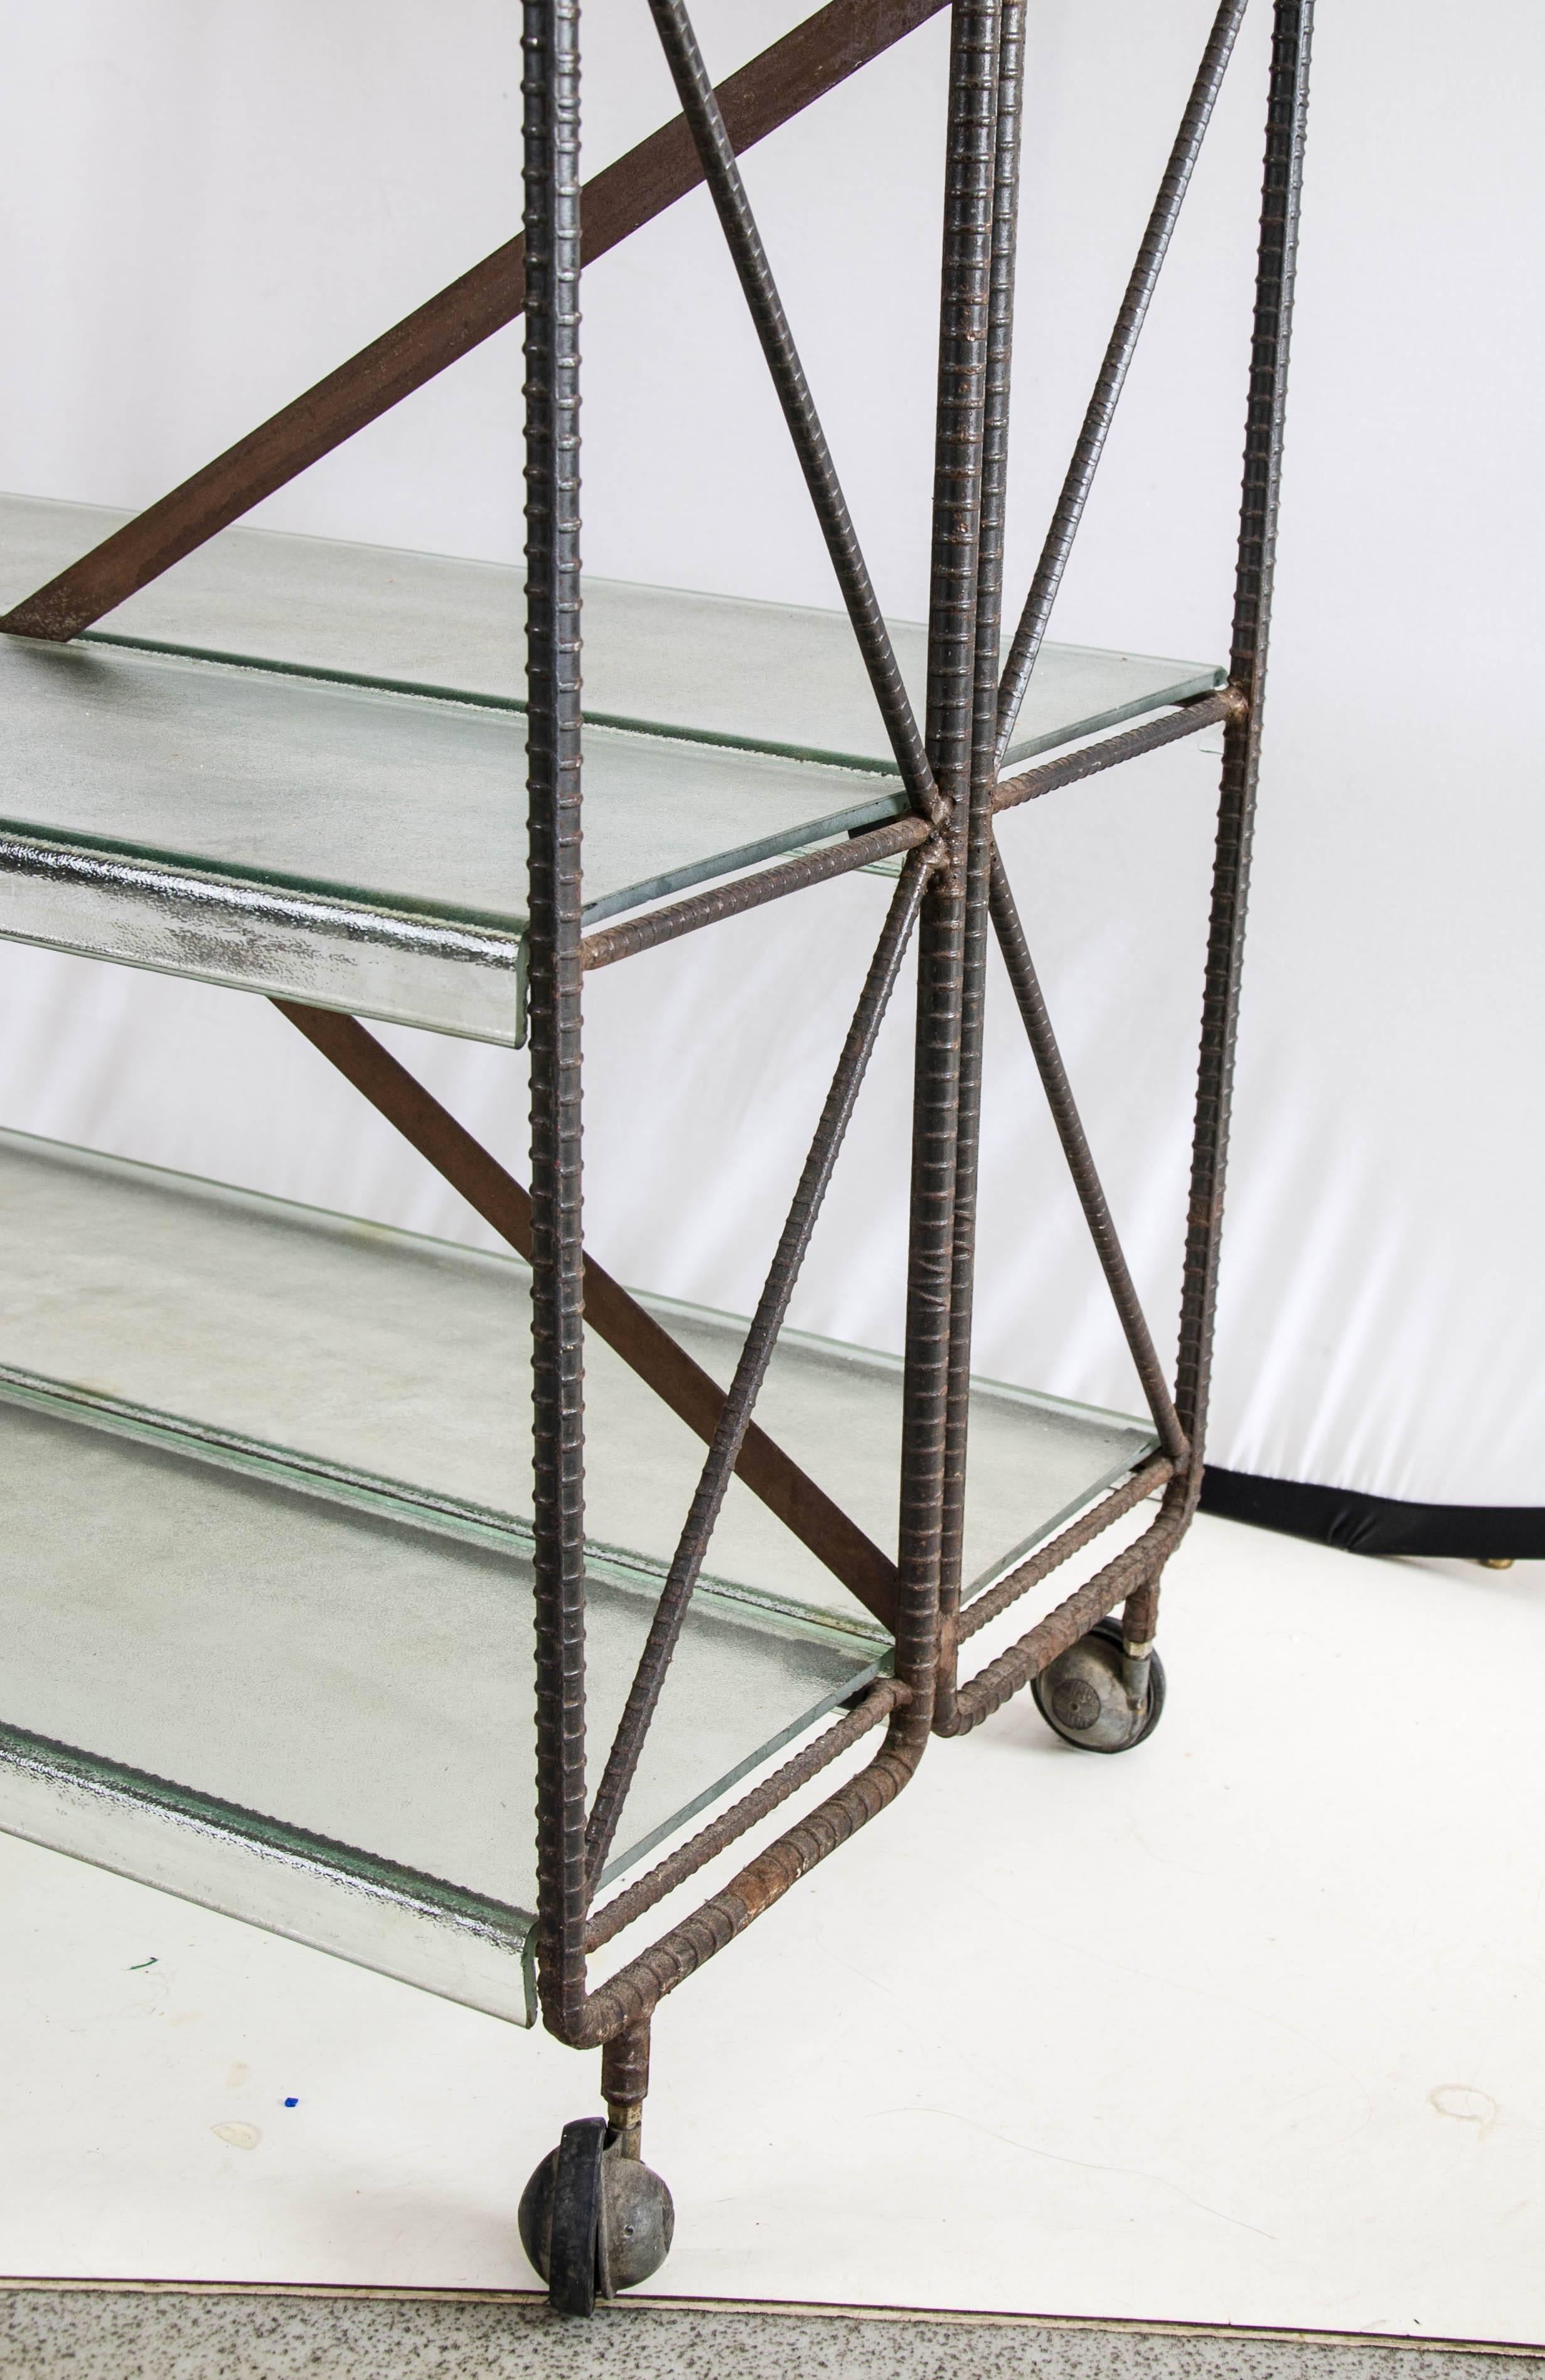 A pair of 'Brutalist' trolleys from the Fogola di Torino bookshop in Turin by Ferdinando Fagnola and Gianni Francione. Attractive molded glass shelves
with industrial bent metallic structure, 1970s.